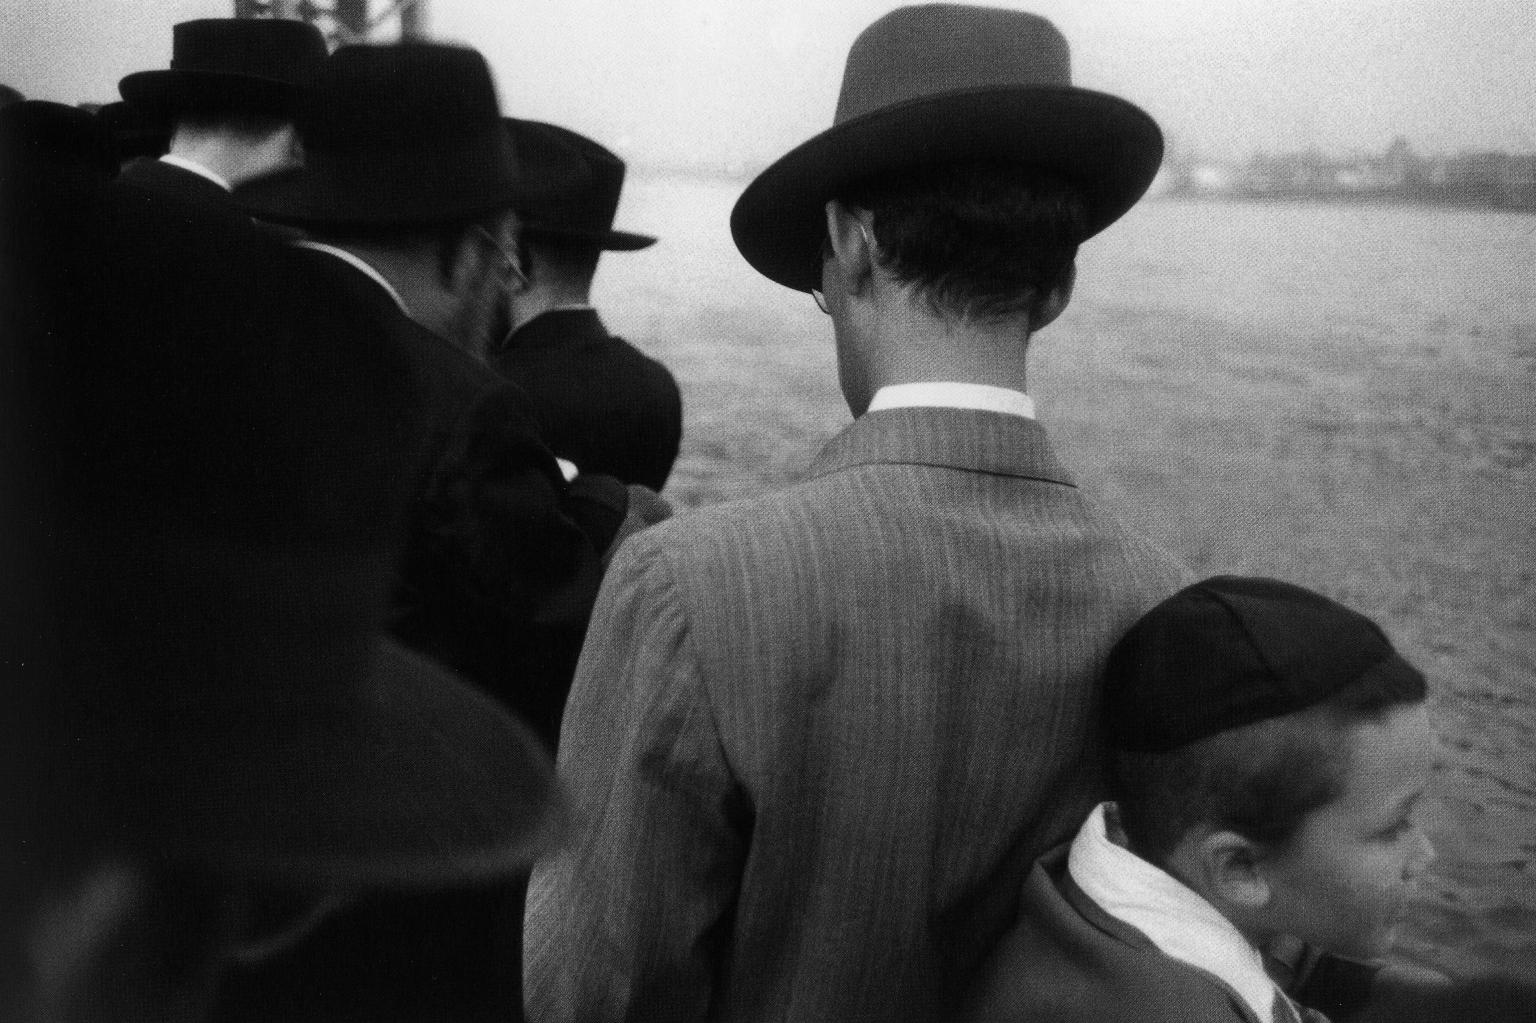 Photograph of men in hats and suits and one boy in skullcap outside with their backs turned away from the camera, looking toward the river.